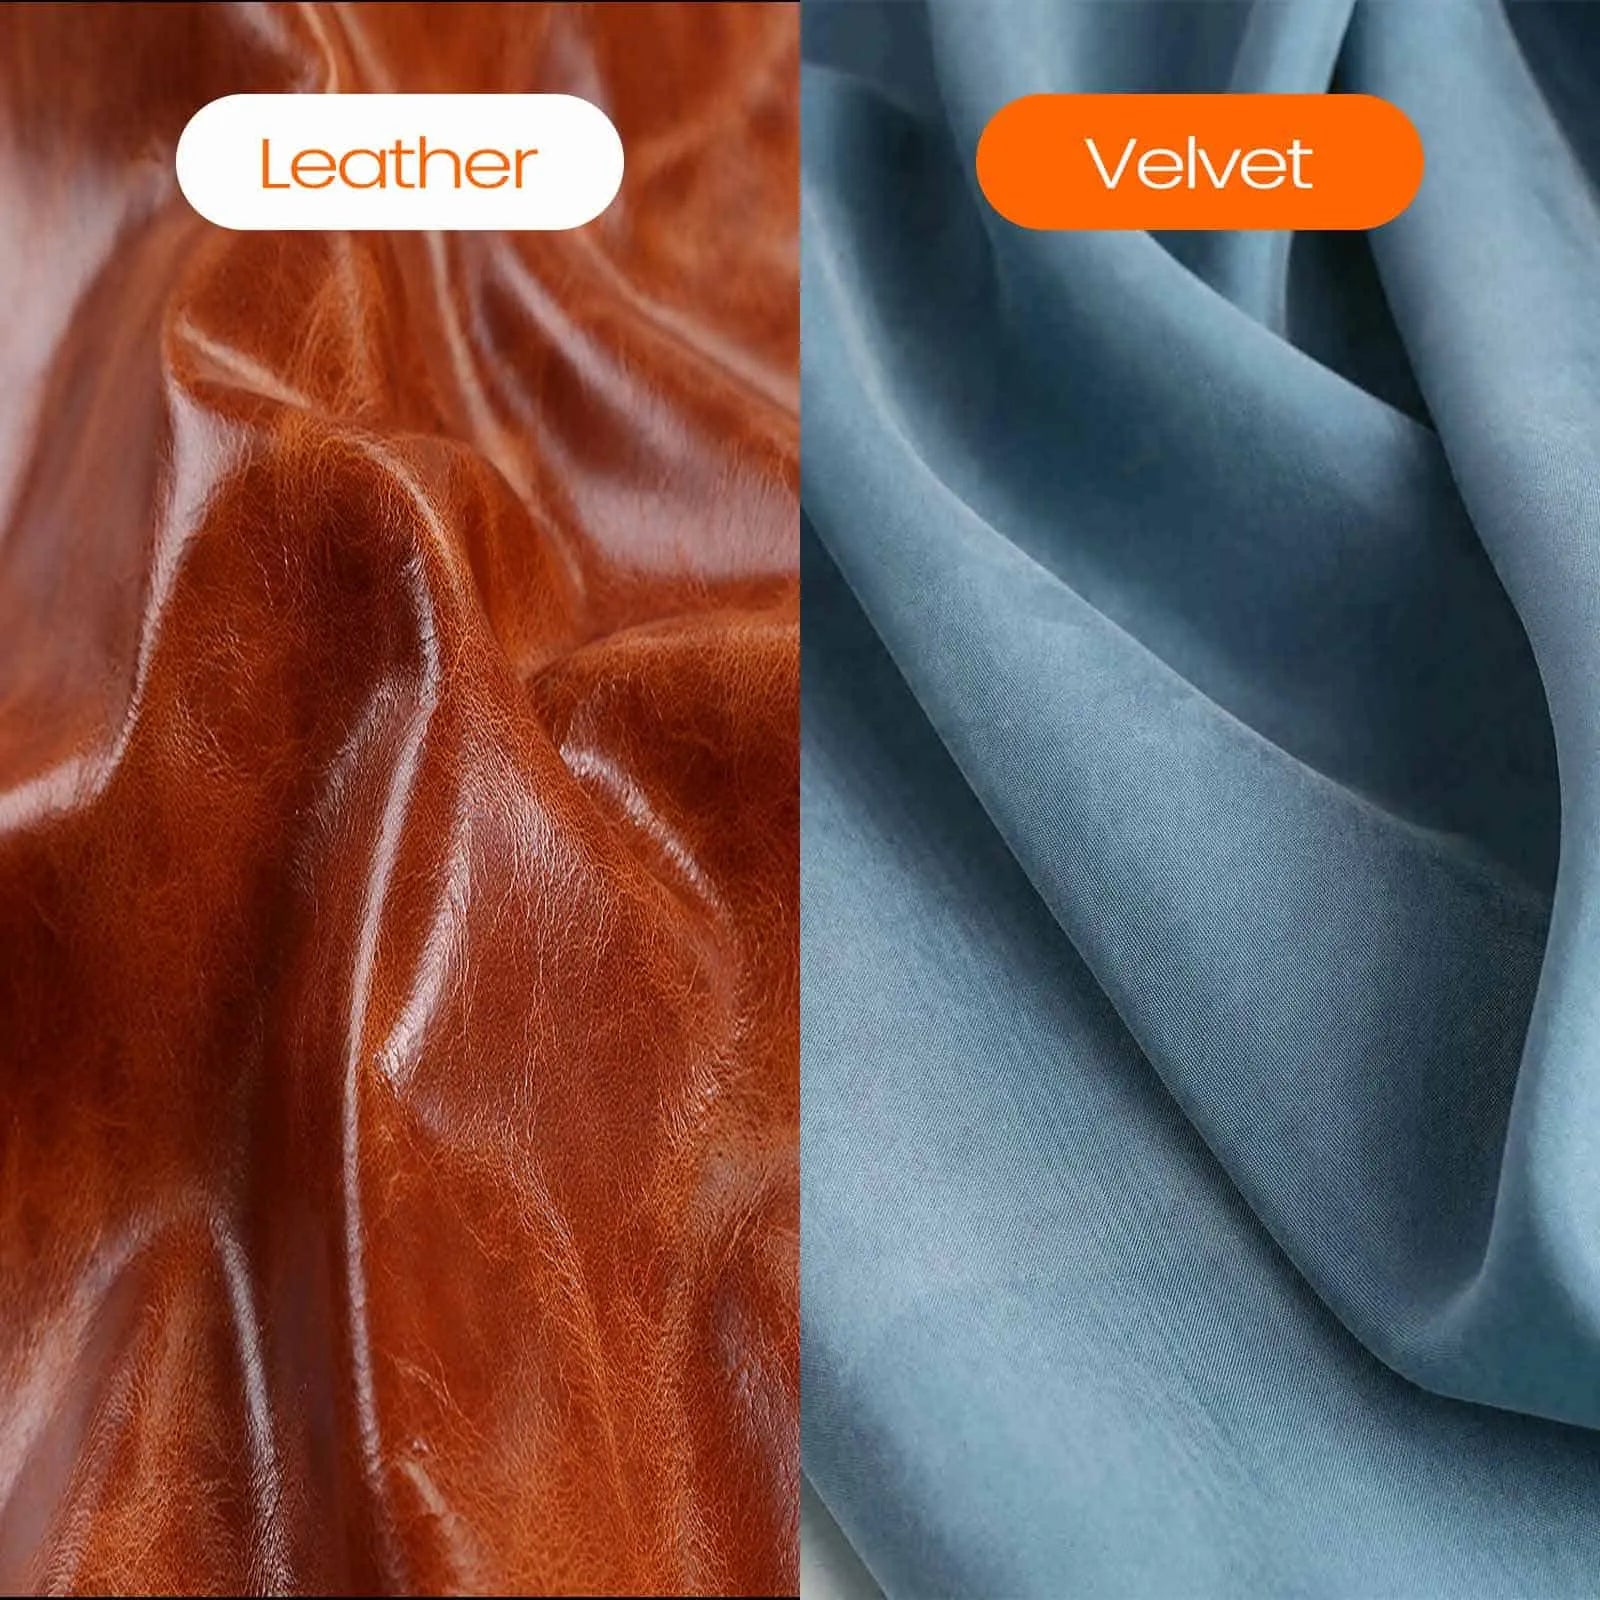 comparative leather and fabric